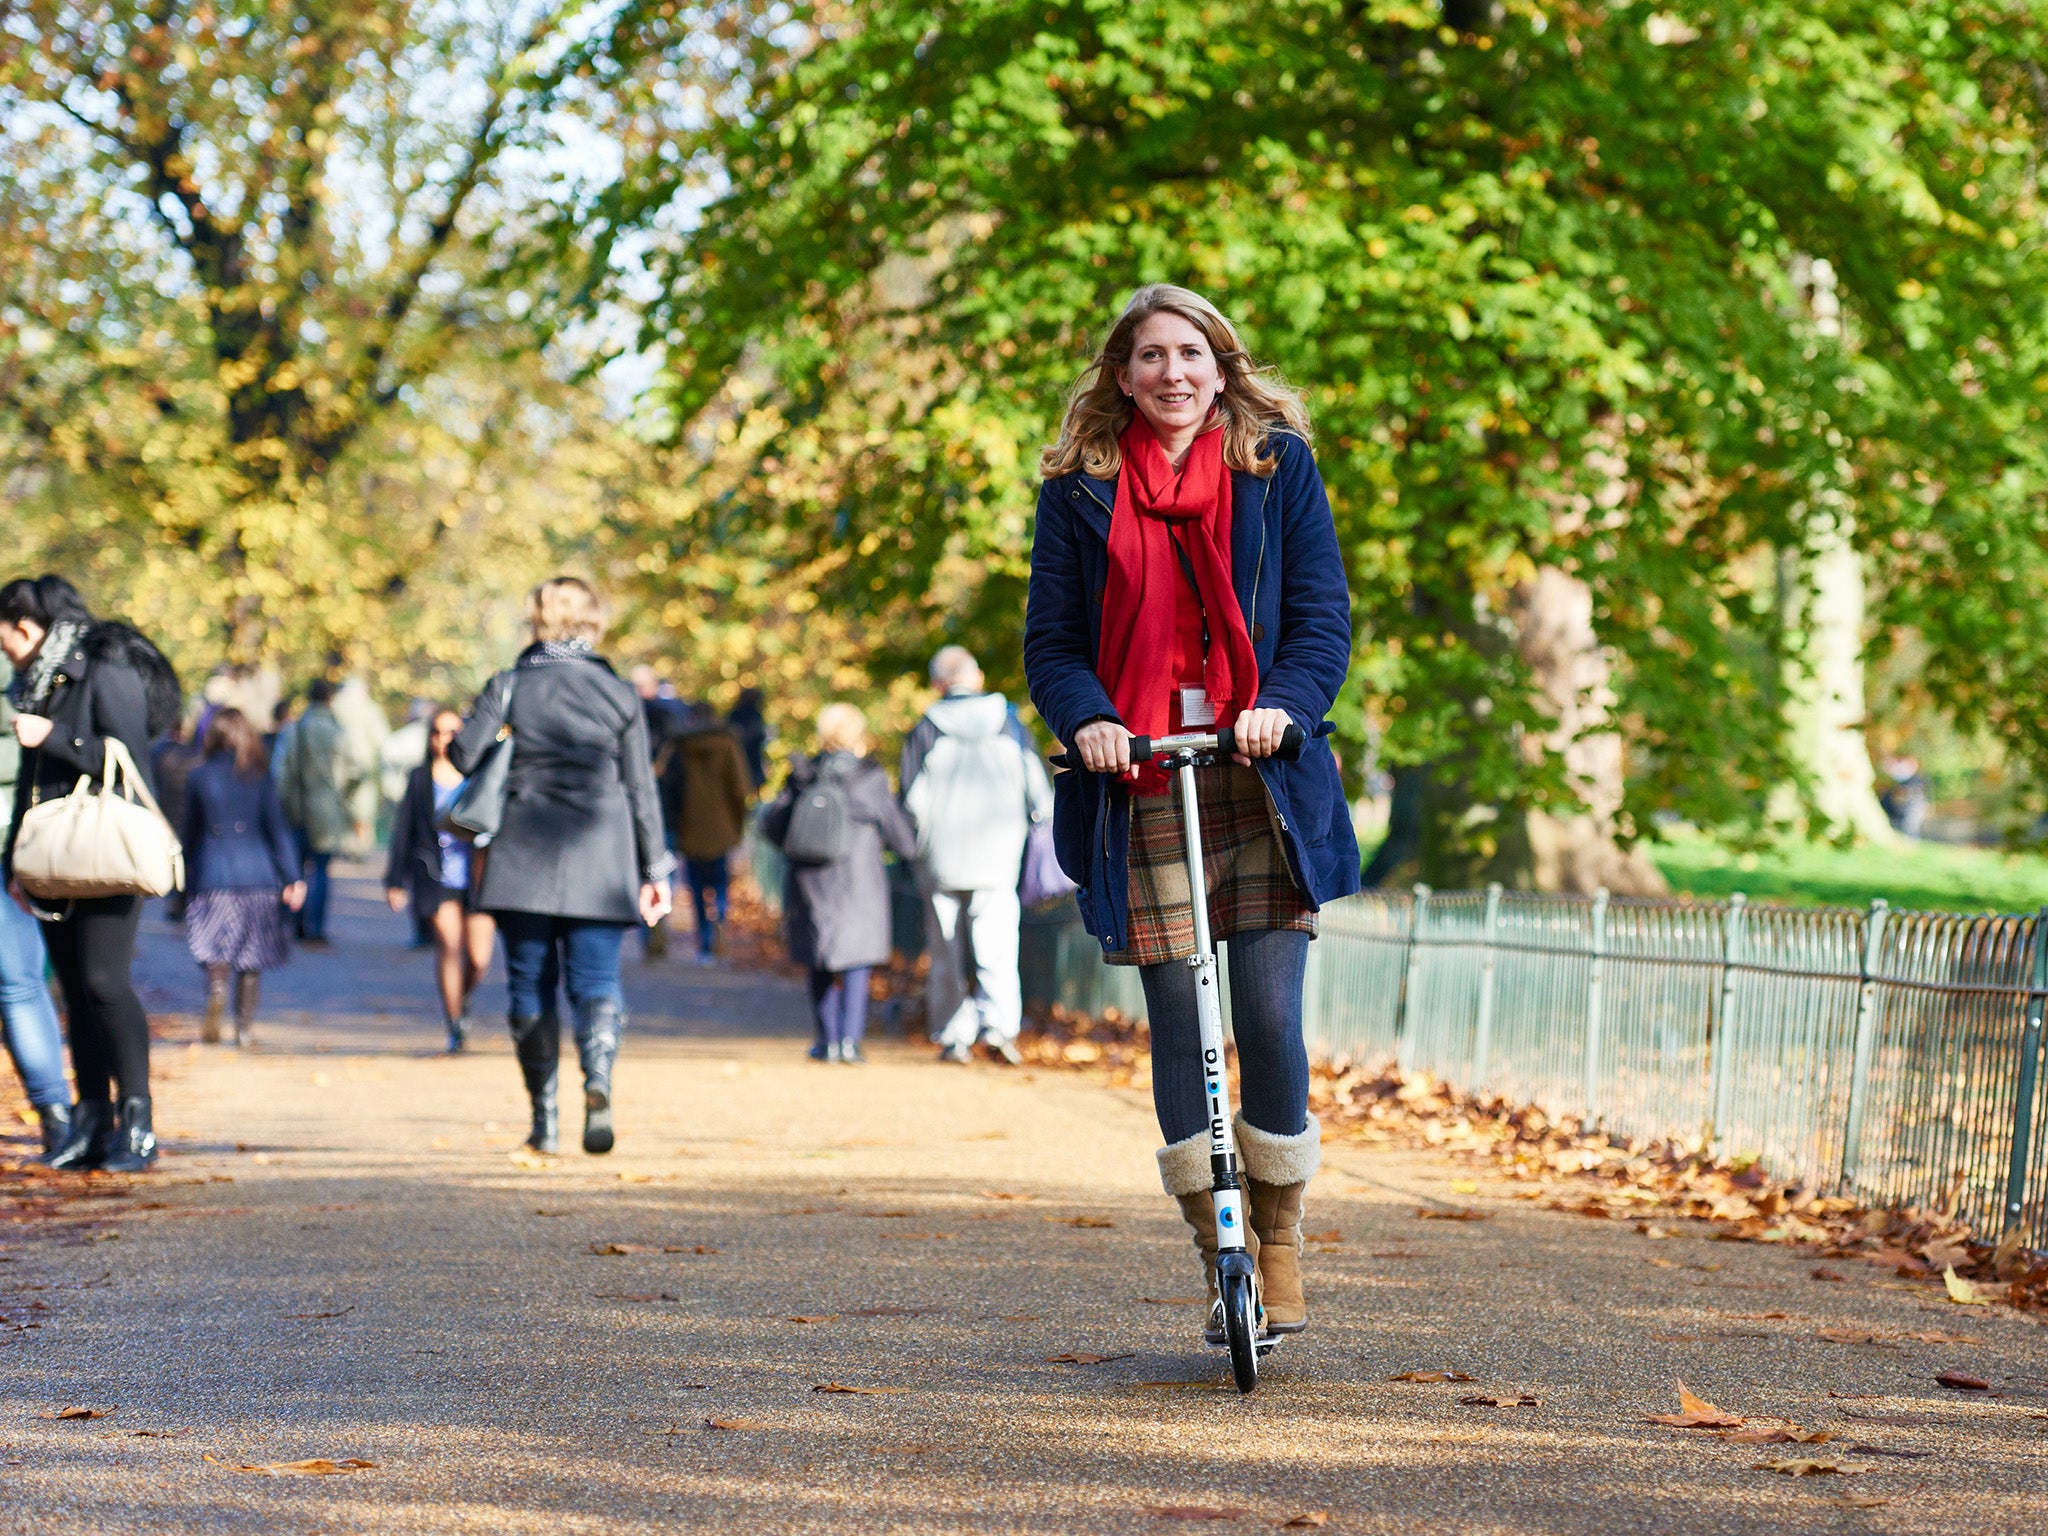 Jane Merrick rides on a Micro Scooter through St James's Park, on November 18, 2014 in London, United Kingdom.